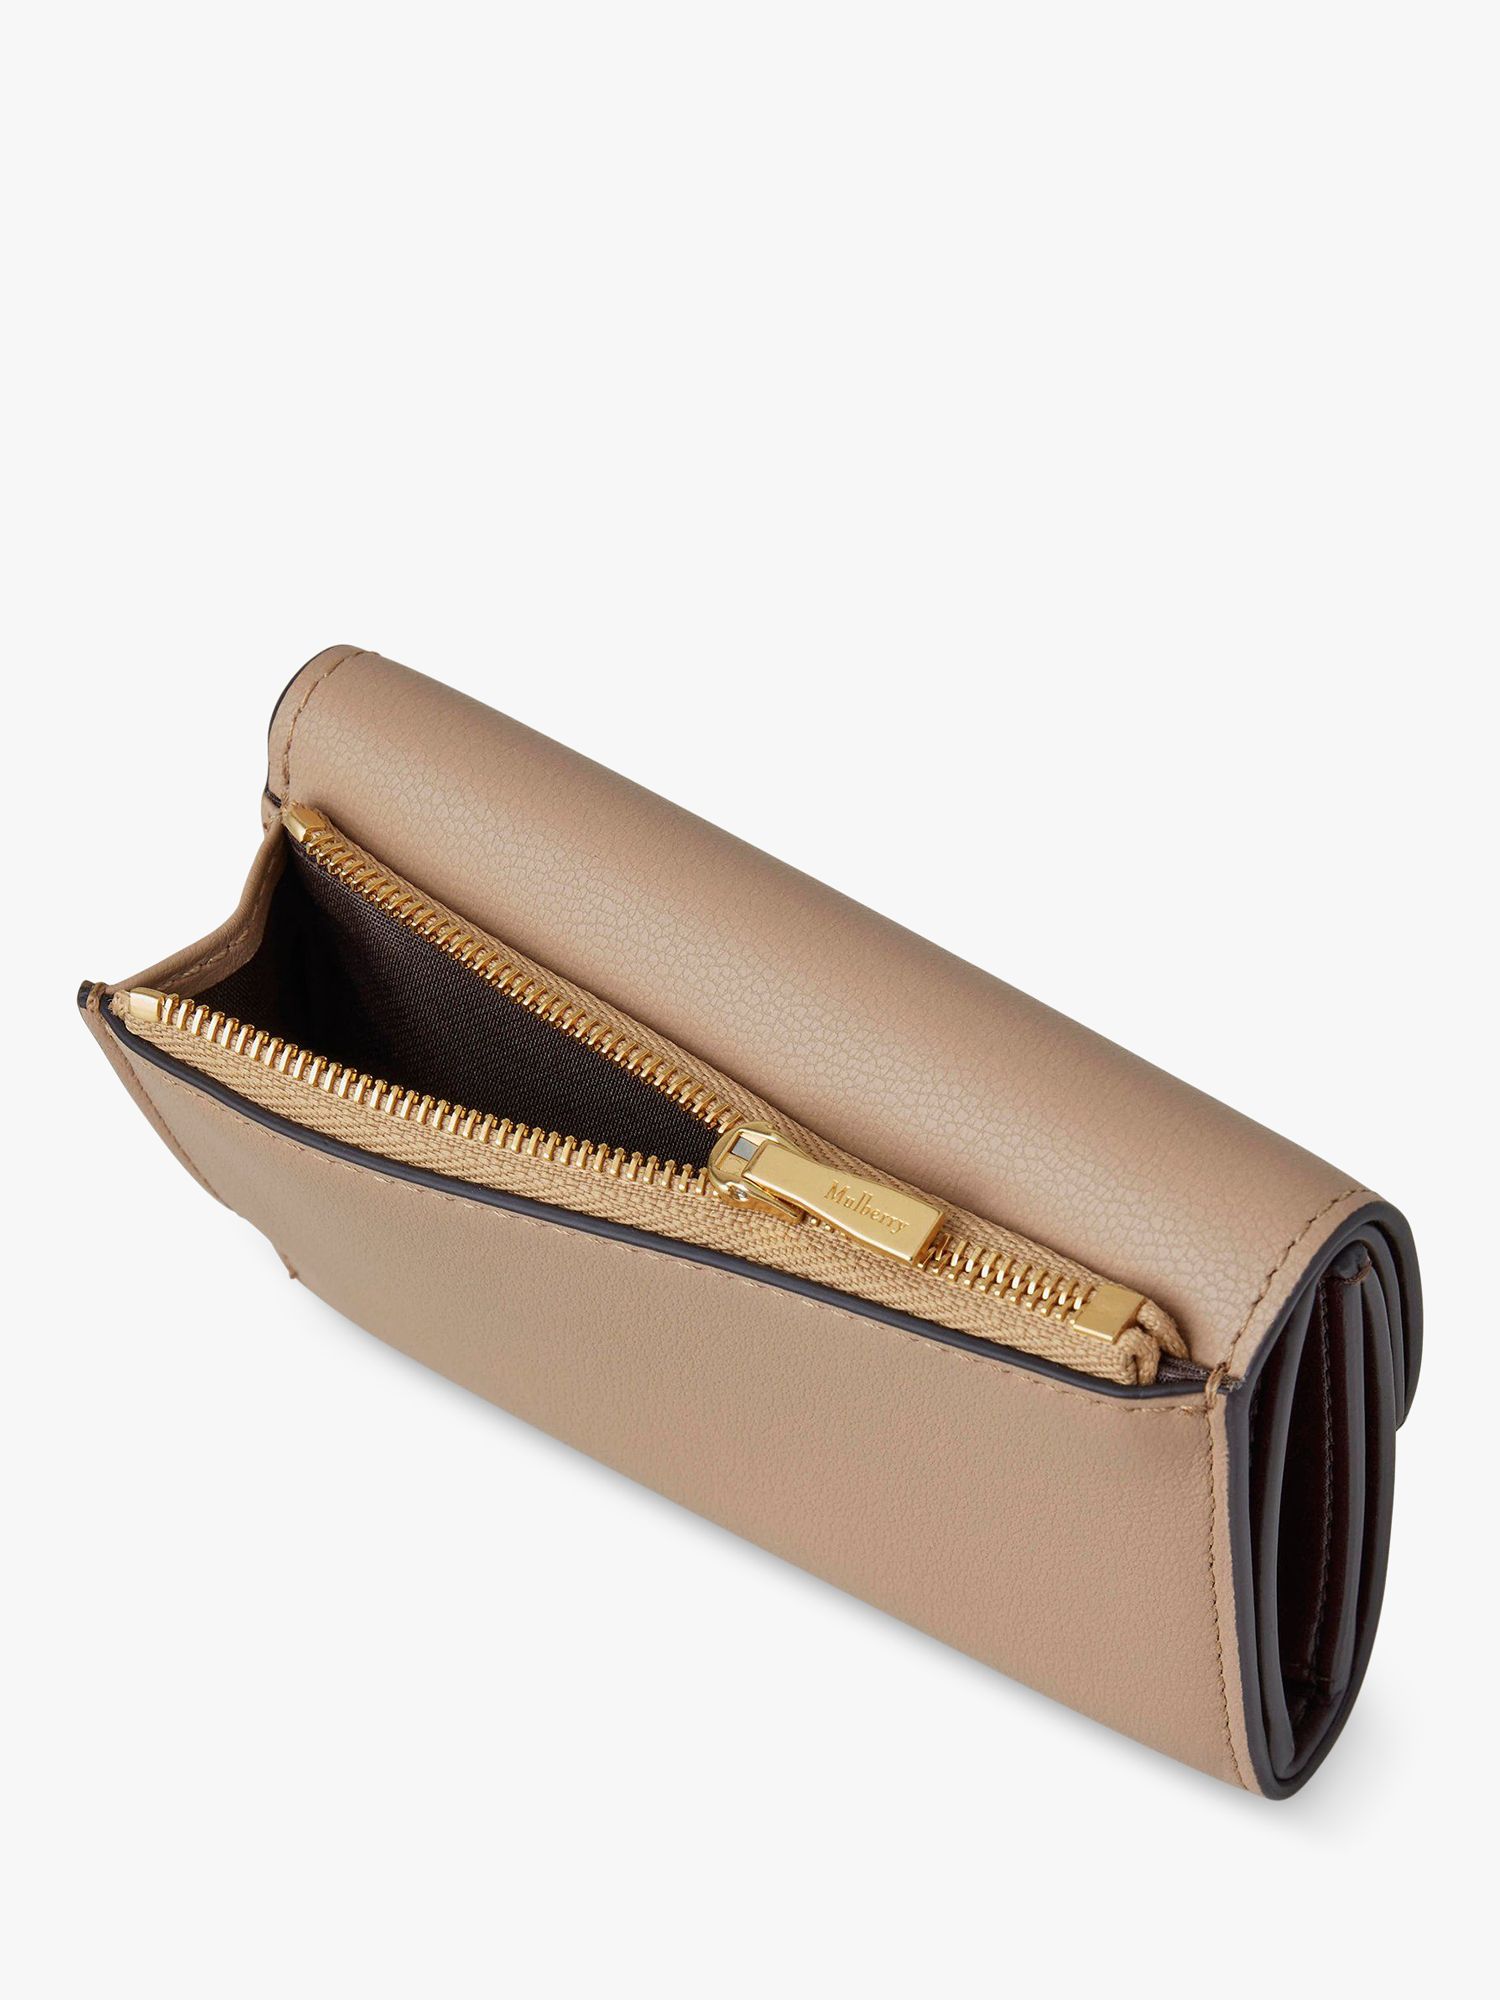 Buy Mulberry Darley Folded Multi-Card Wallet, Maple Online at johnlewis.com